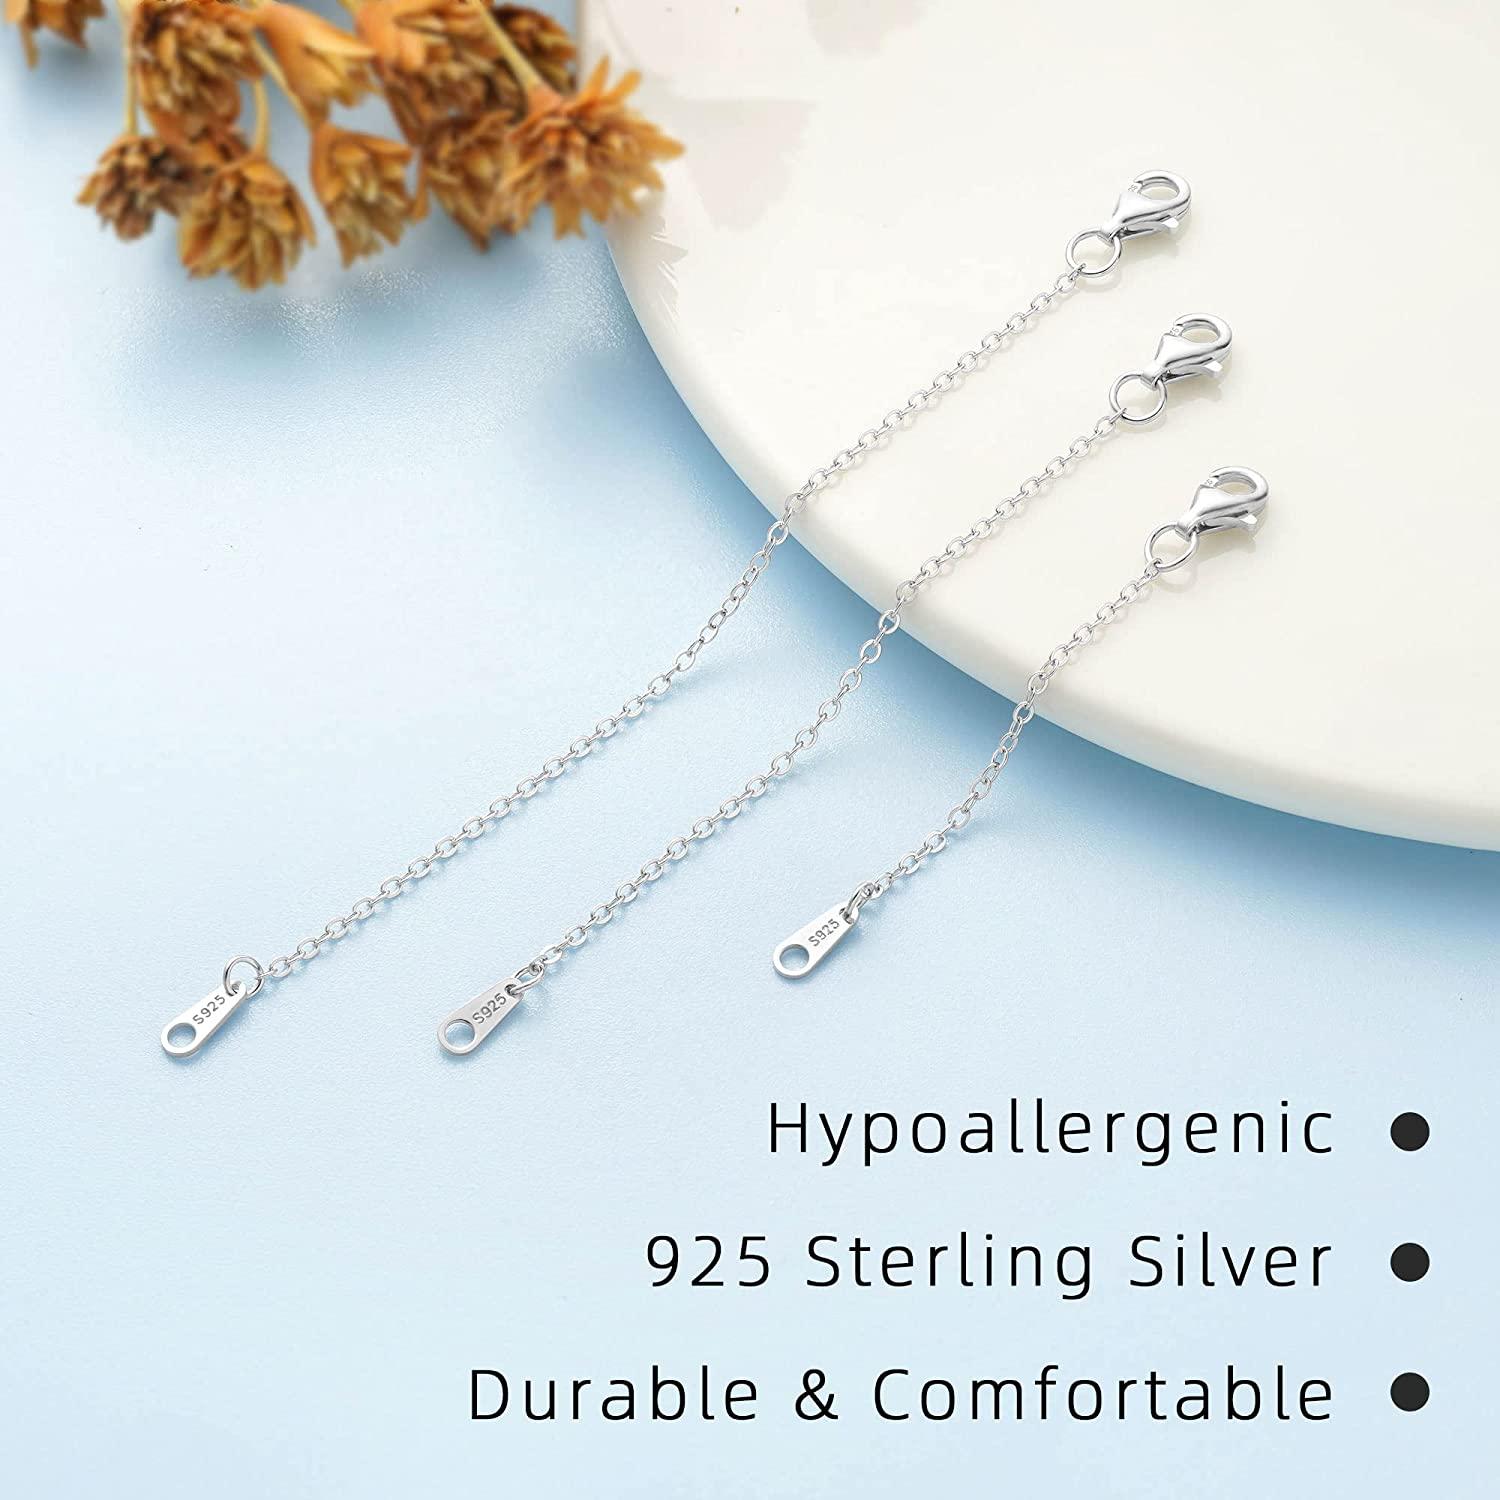 2-inch Necklace Extenders